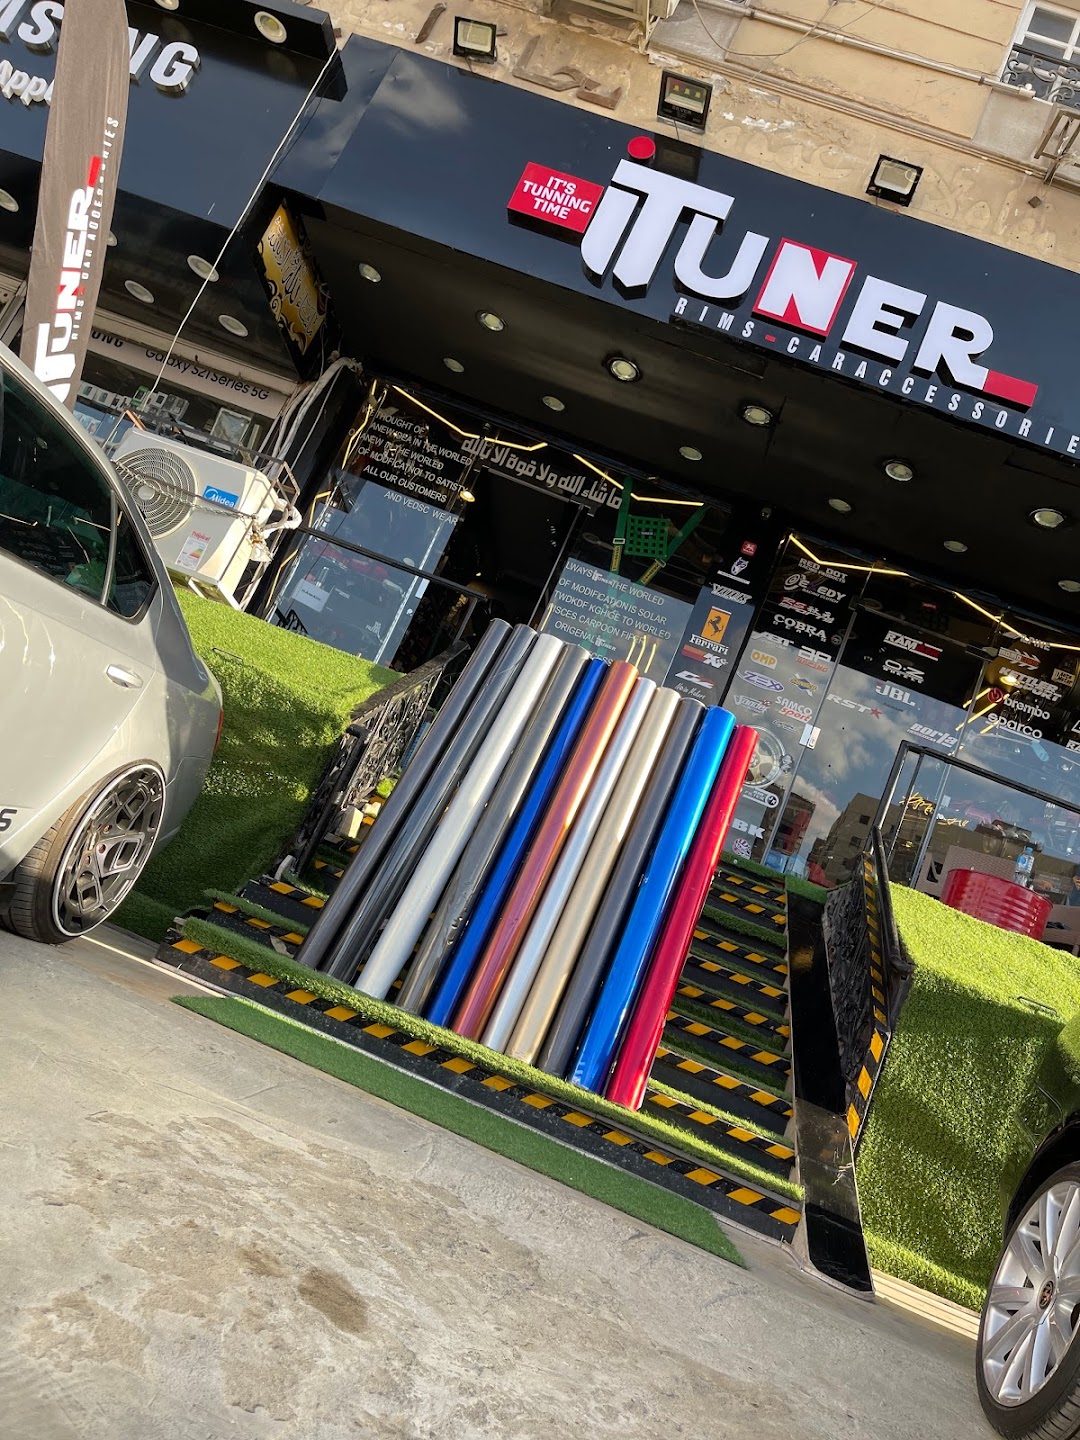 ITuner for car accessories